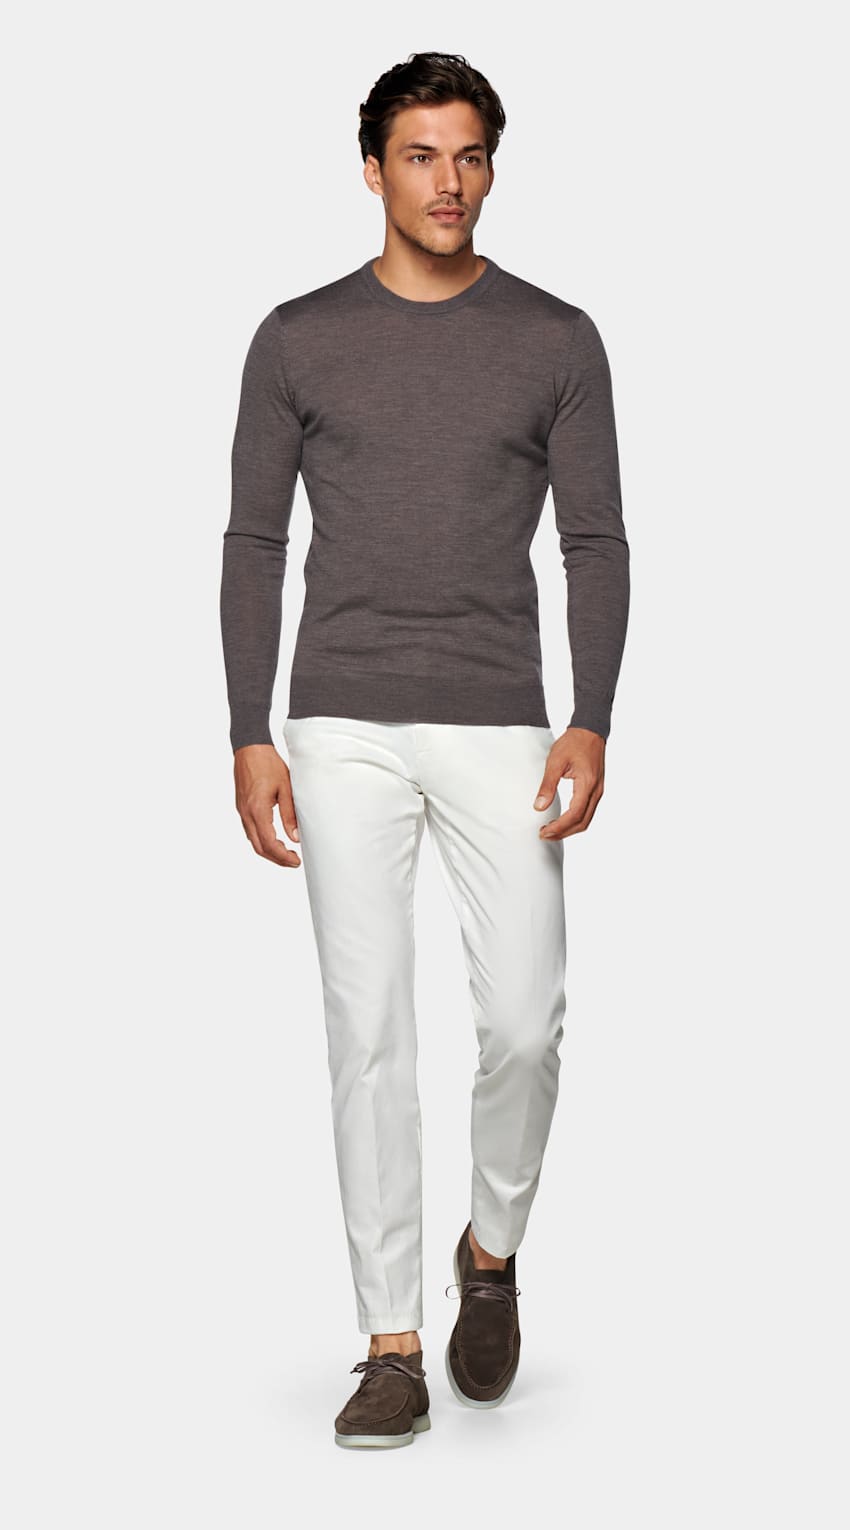 Taupe Crewneck | Pure Merino Wool | Suitsupply Online Store